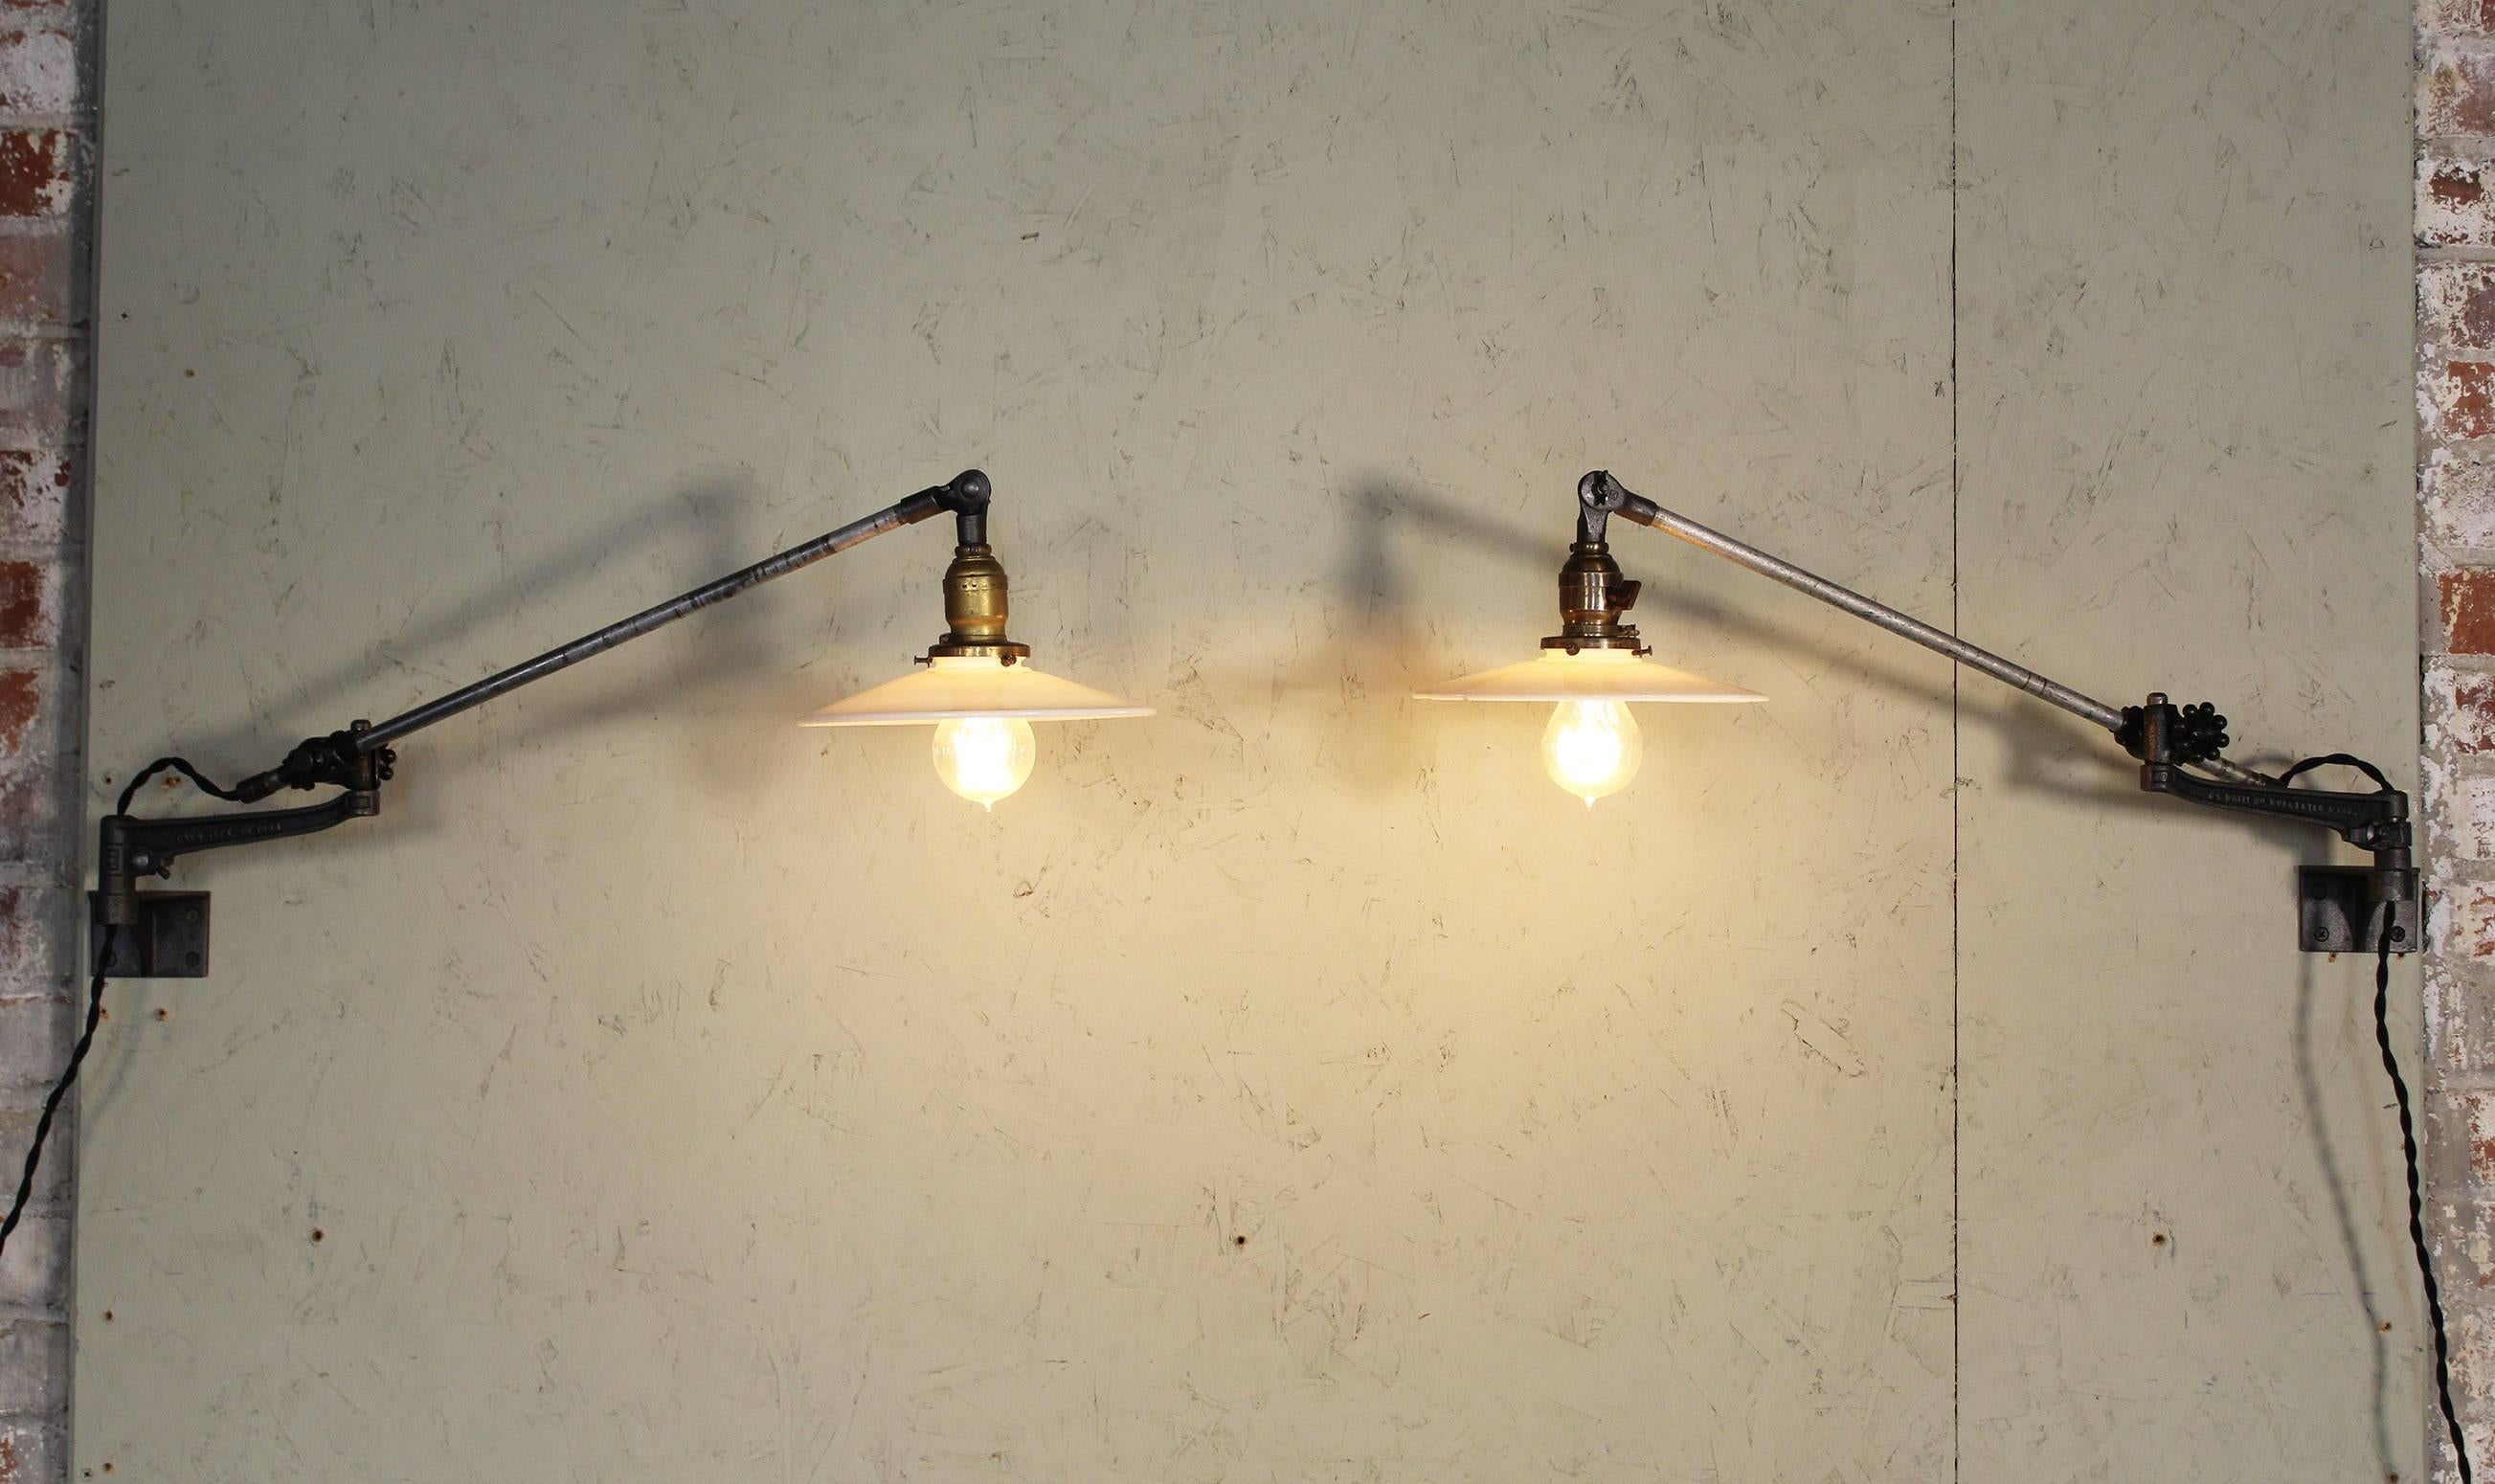 Pair of vintage Industrial milk glass O.C. White wall task lamps, lights with Edison Bulbs. Articulating lamps with cast iron knob adjustment fittings. Milk glass shades measure 8 1/4